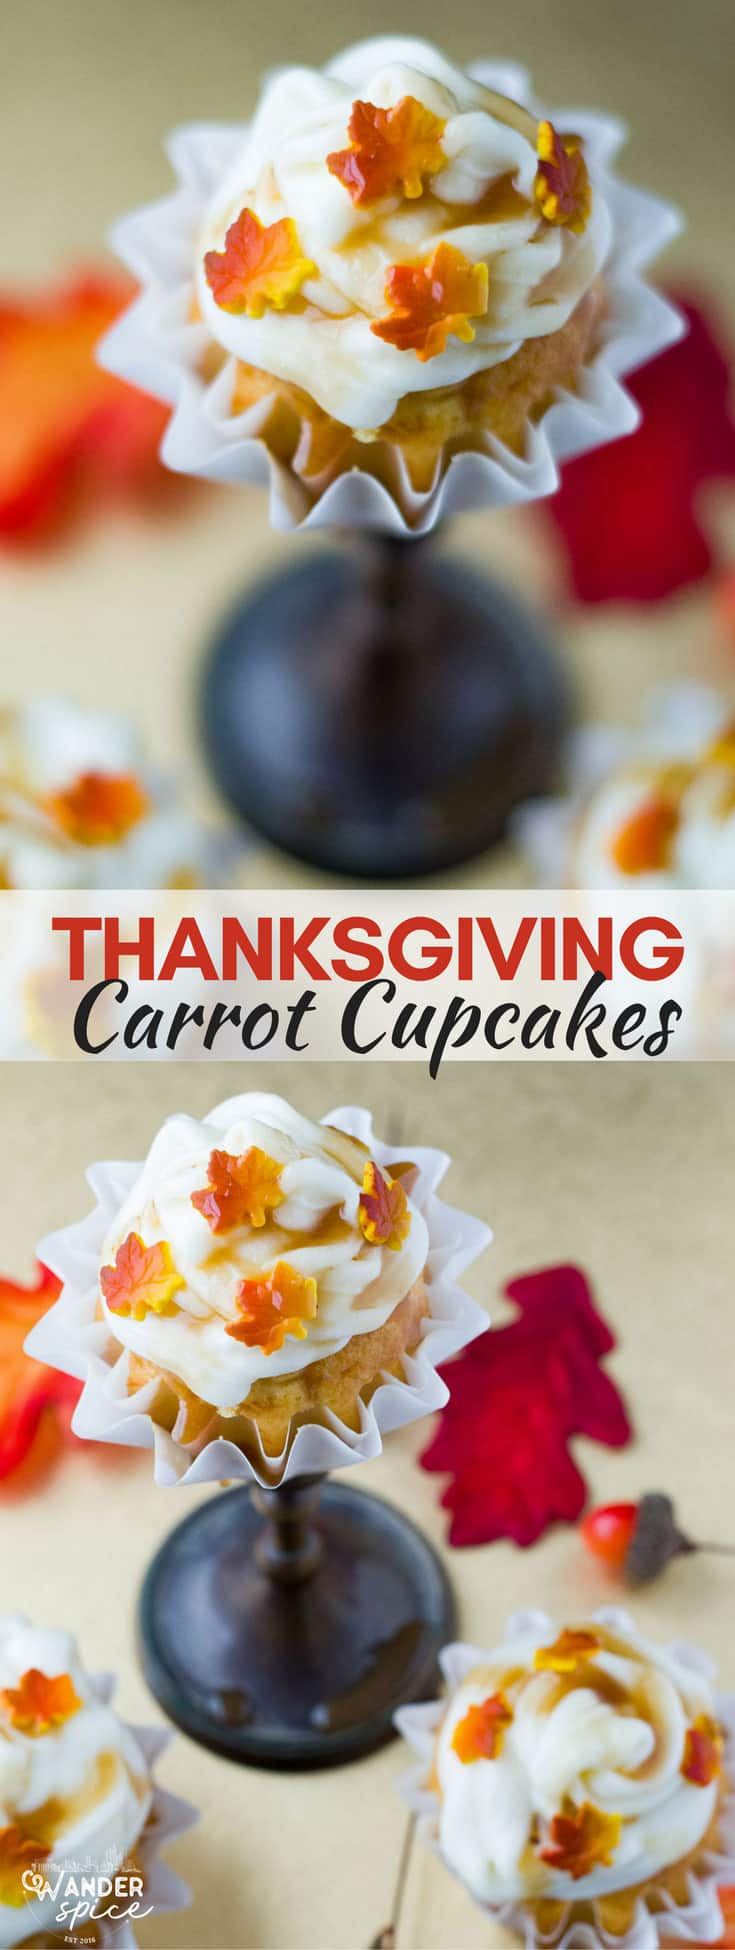 Easy and so cute Thanksgiving Cupcakes recipe. Carrot cake base with a light frosting and caramel drip. #cupcakes